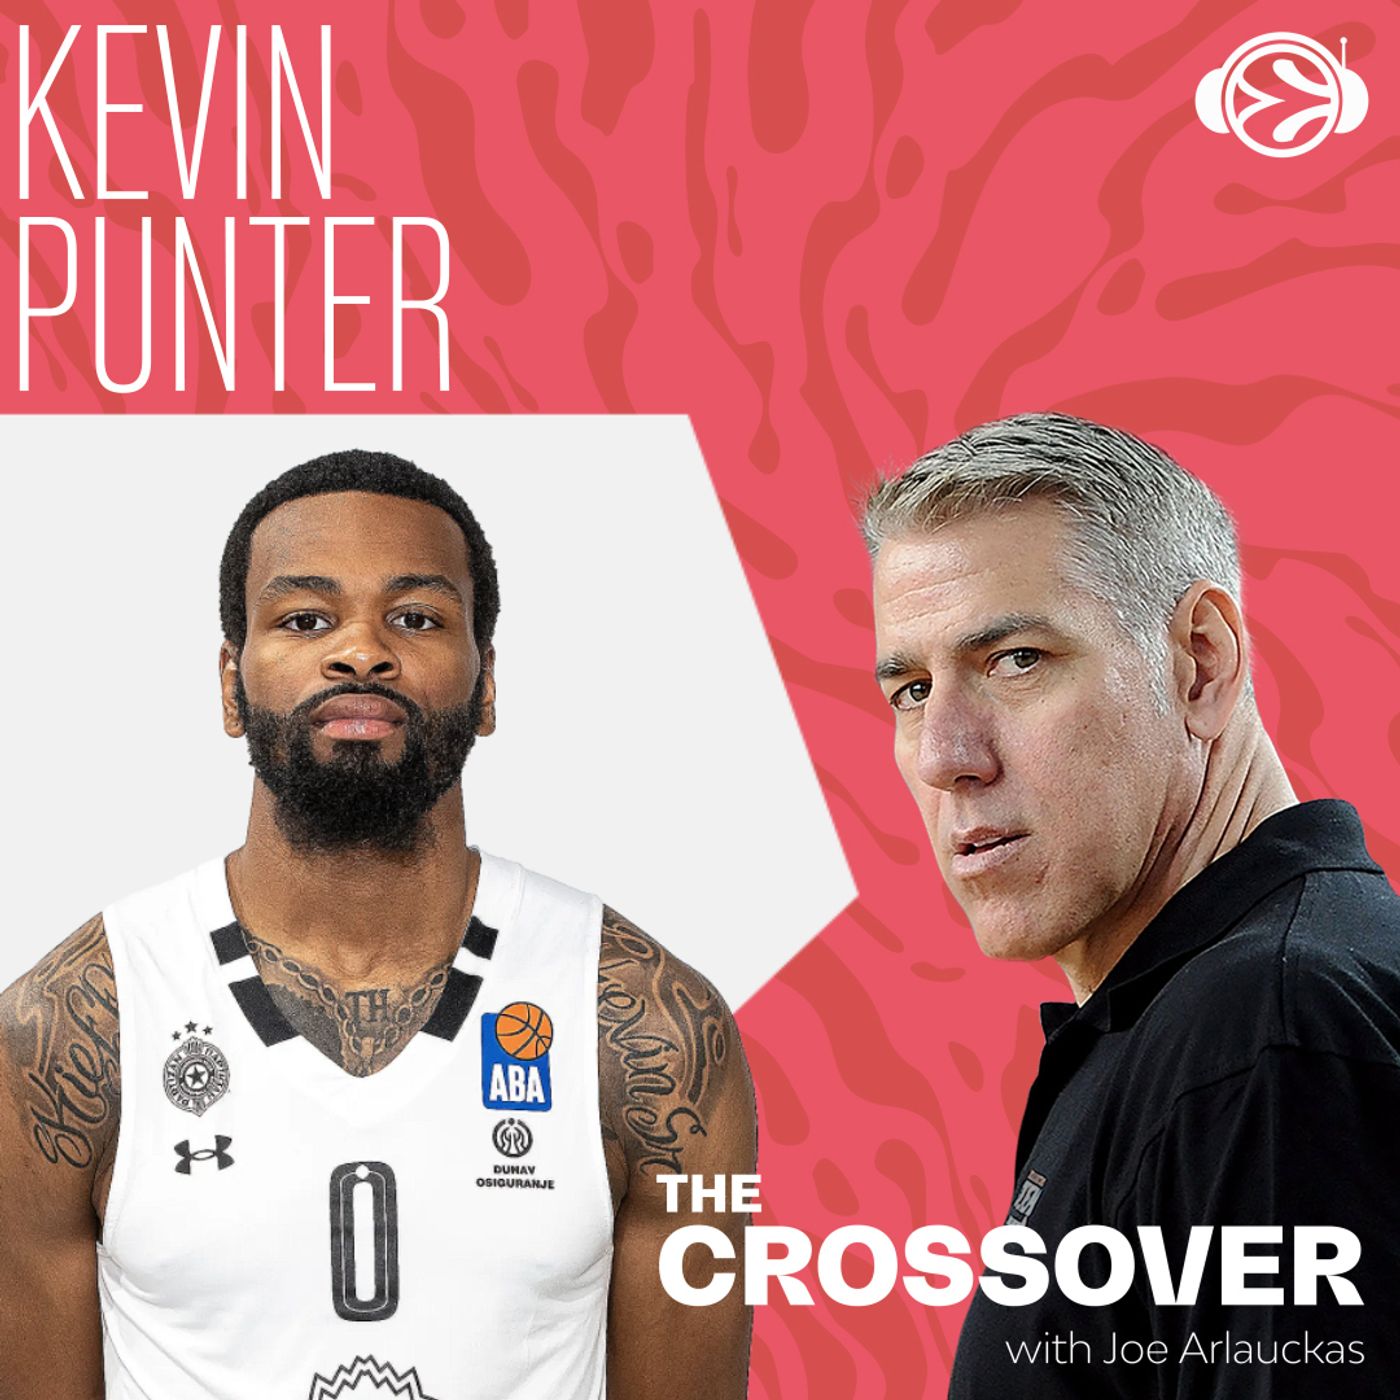 S4 Ep5: The Crossover: Kevin Punter